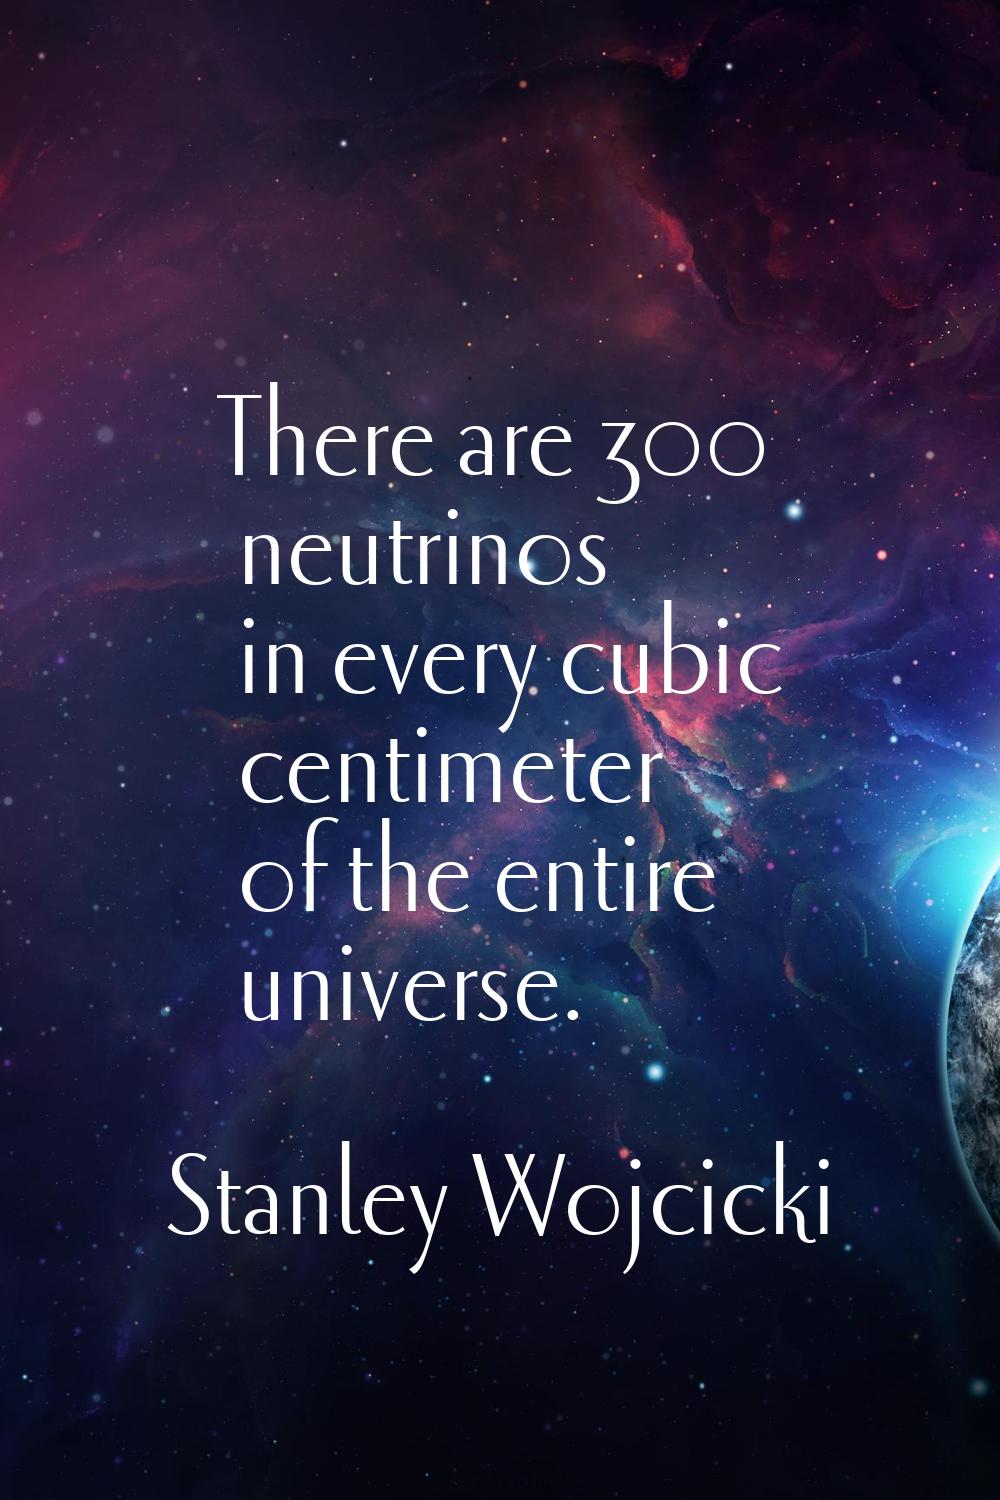 There are 300 neutrinos in every cubic centimeter of the entire universe.